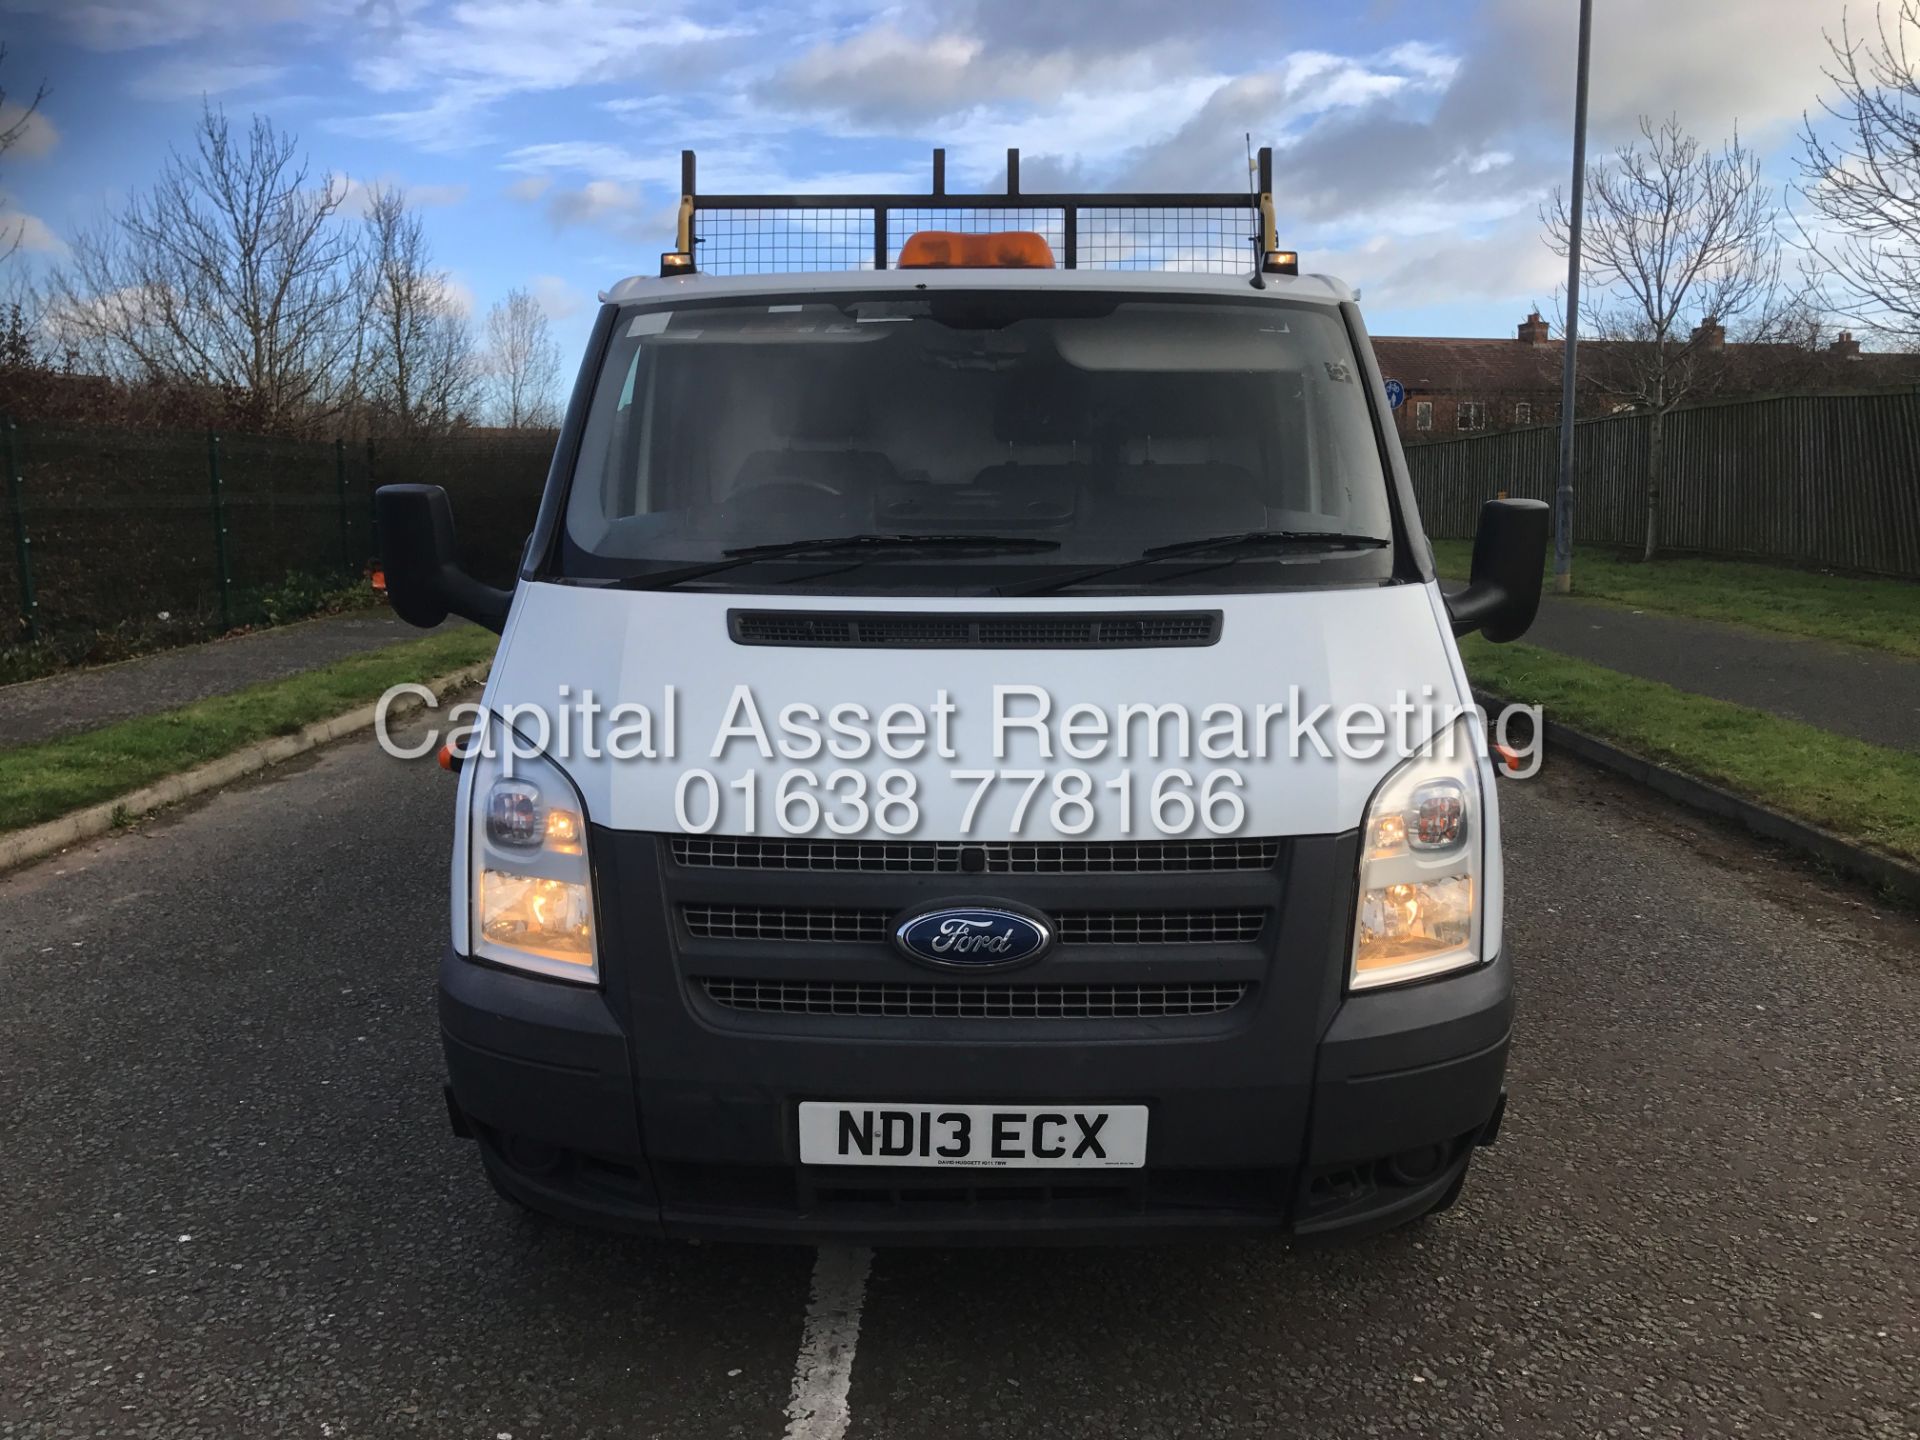 FORD TRANSIT 2.2TDCI T350 LWB TWIN REAR WHEEL "TIPPER" DOUBLE CAB (13 REG) 1 OWNER- LONDON COMPLIANT - Image 3 of 19